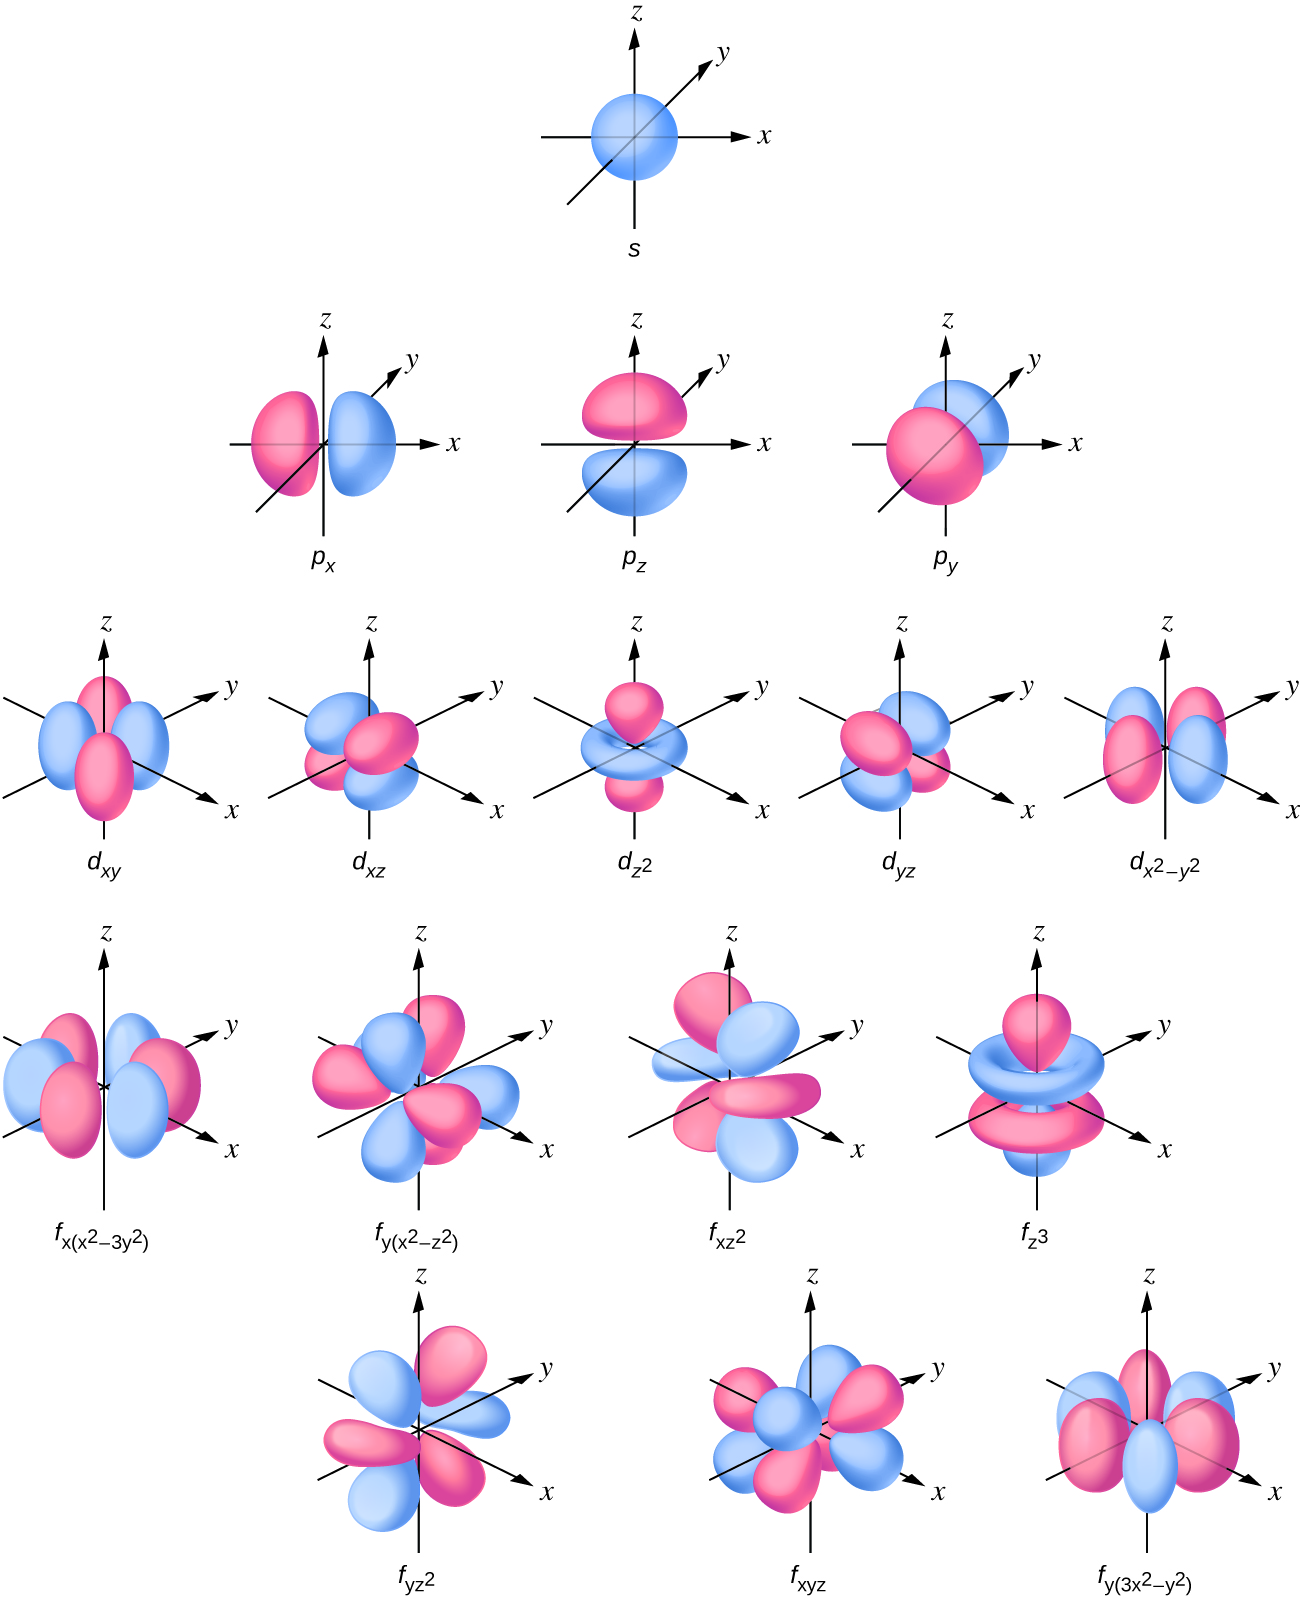 This diagram illustrates the shapes and quantities of all s, p, d, and f orbitals. The s sublevel is composed of a single spherical orbital. The p sublevel is composed of 3 dumbbell shaped orbitals oriented along the x, y, and z axes. The five d sublevels and seven f sublevels are considerably more complex.